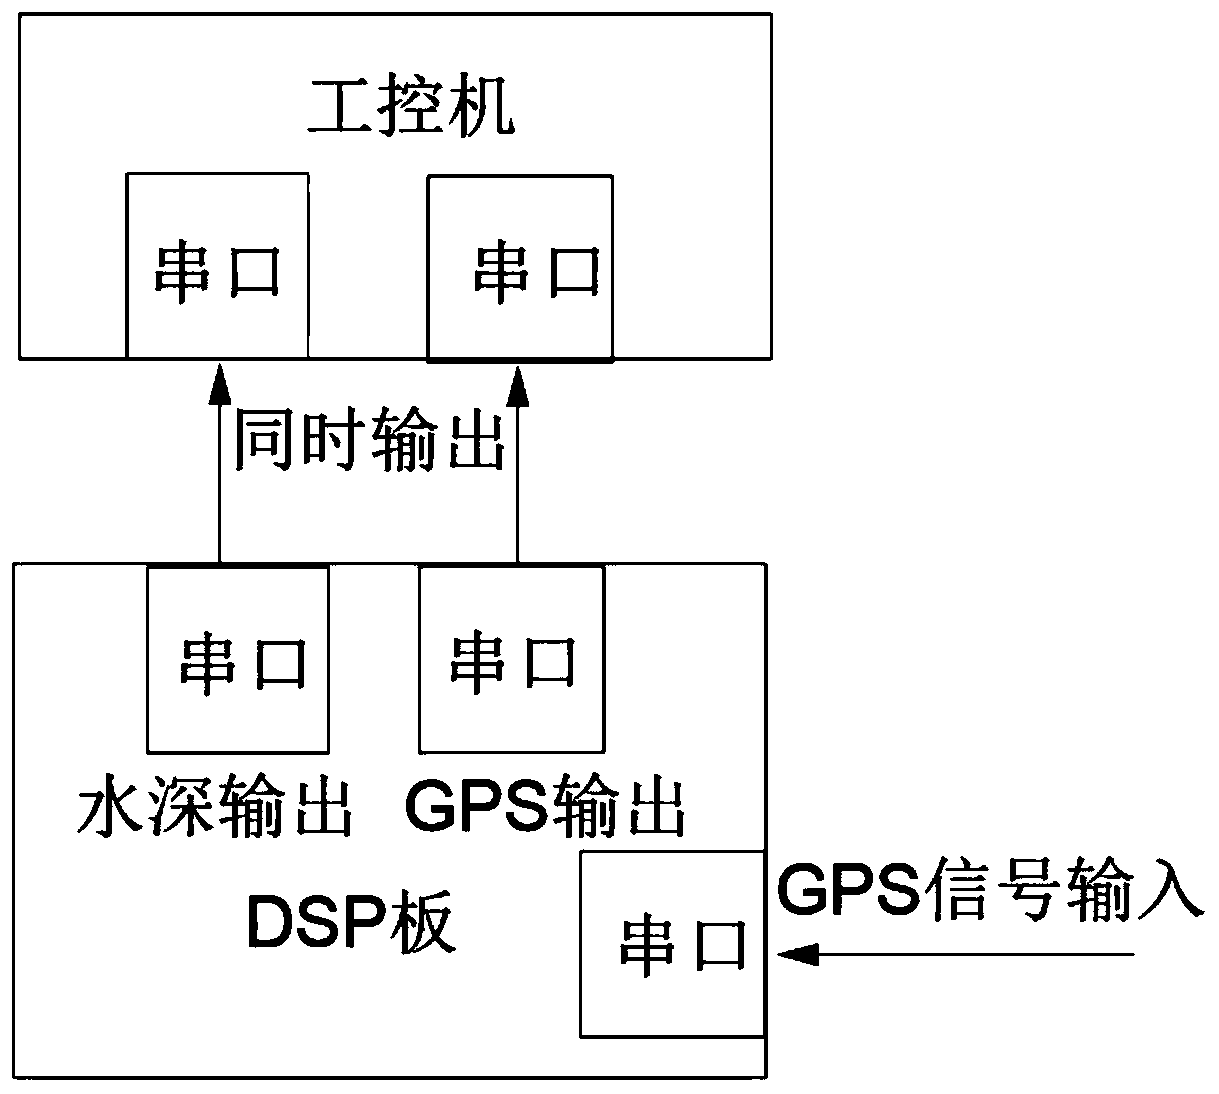 GPS-based water depth synchronization method and equipment